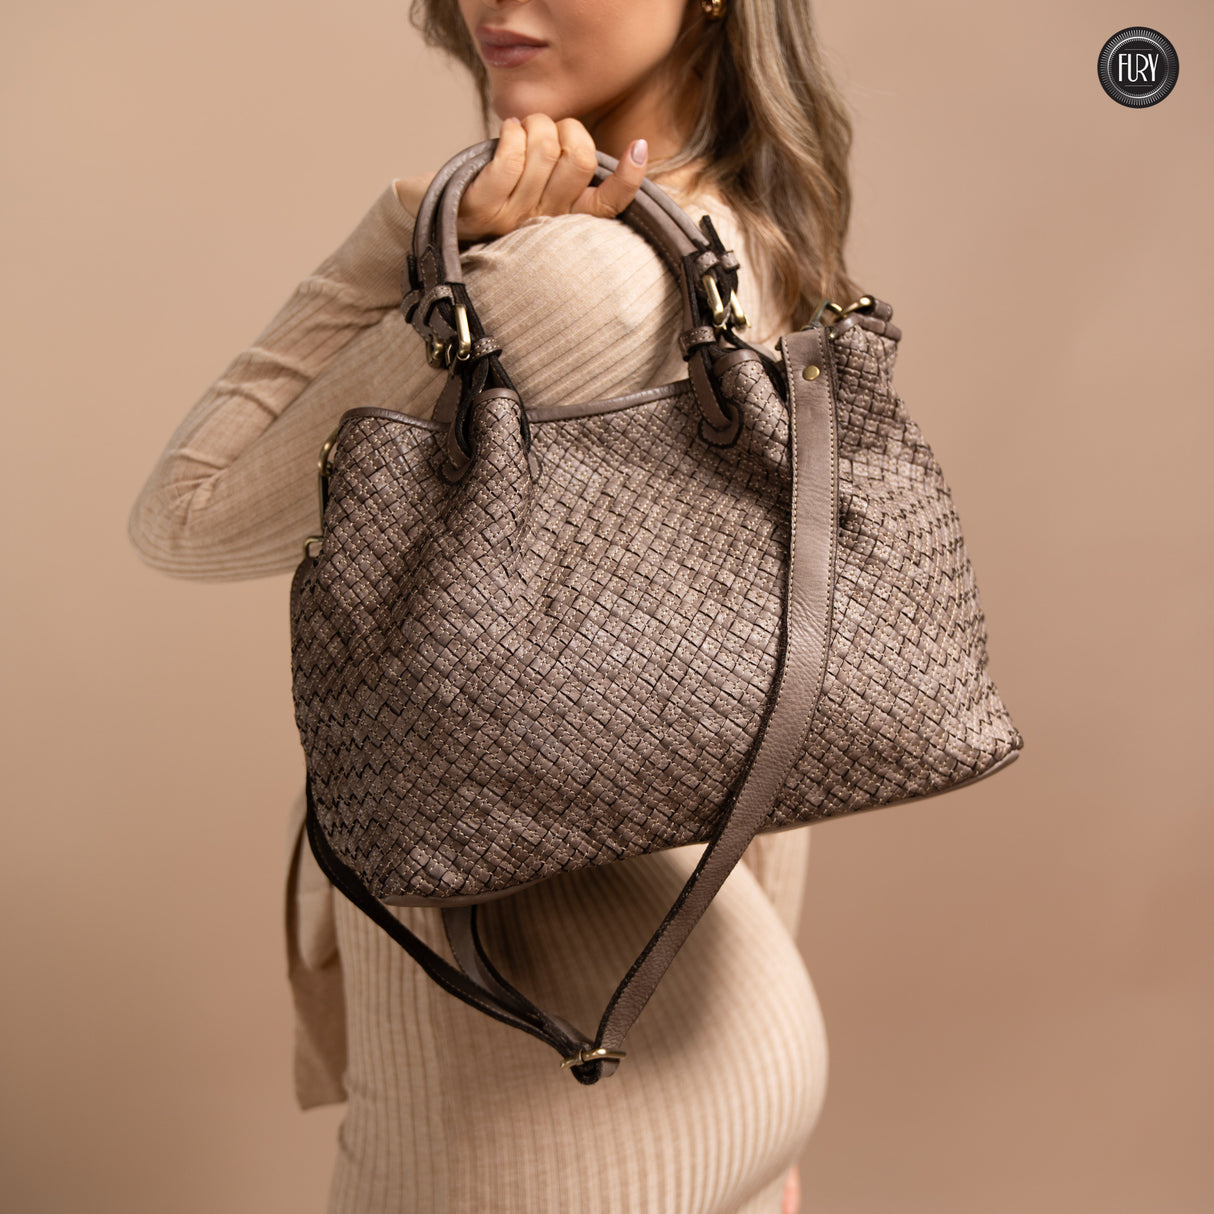 Agata bag in woven leather